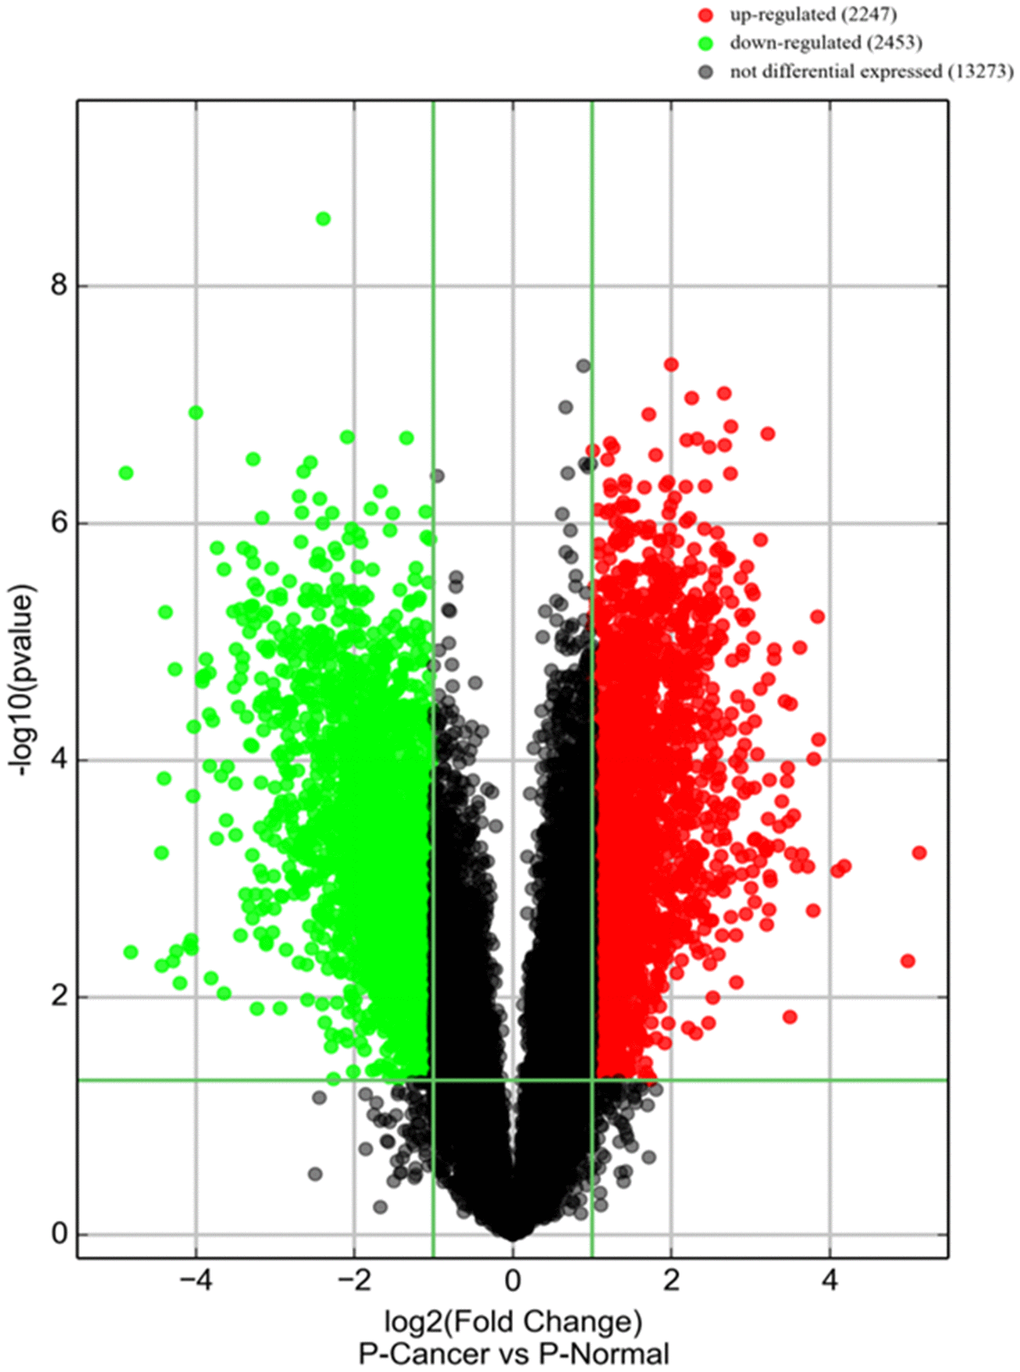 piRNA expression in PCa tissues. Volcano plot shows piRNA differential expression in PCa tissues and controls using fold-change values and P-values. The horizontal green line represents a P-value of 0.05, and the vertical green lines correspond to 2.0-fold up and down, respectively. “Red points” indicates high relative expression and “Green points” indicates relative low expression with statistical significance (P